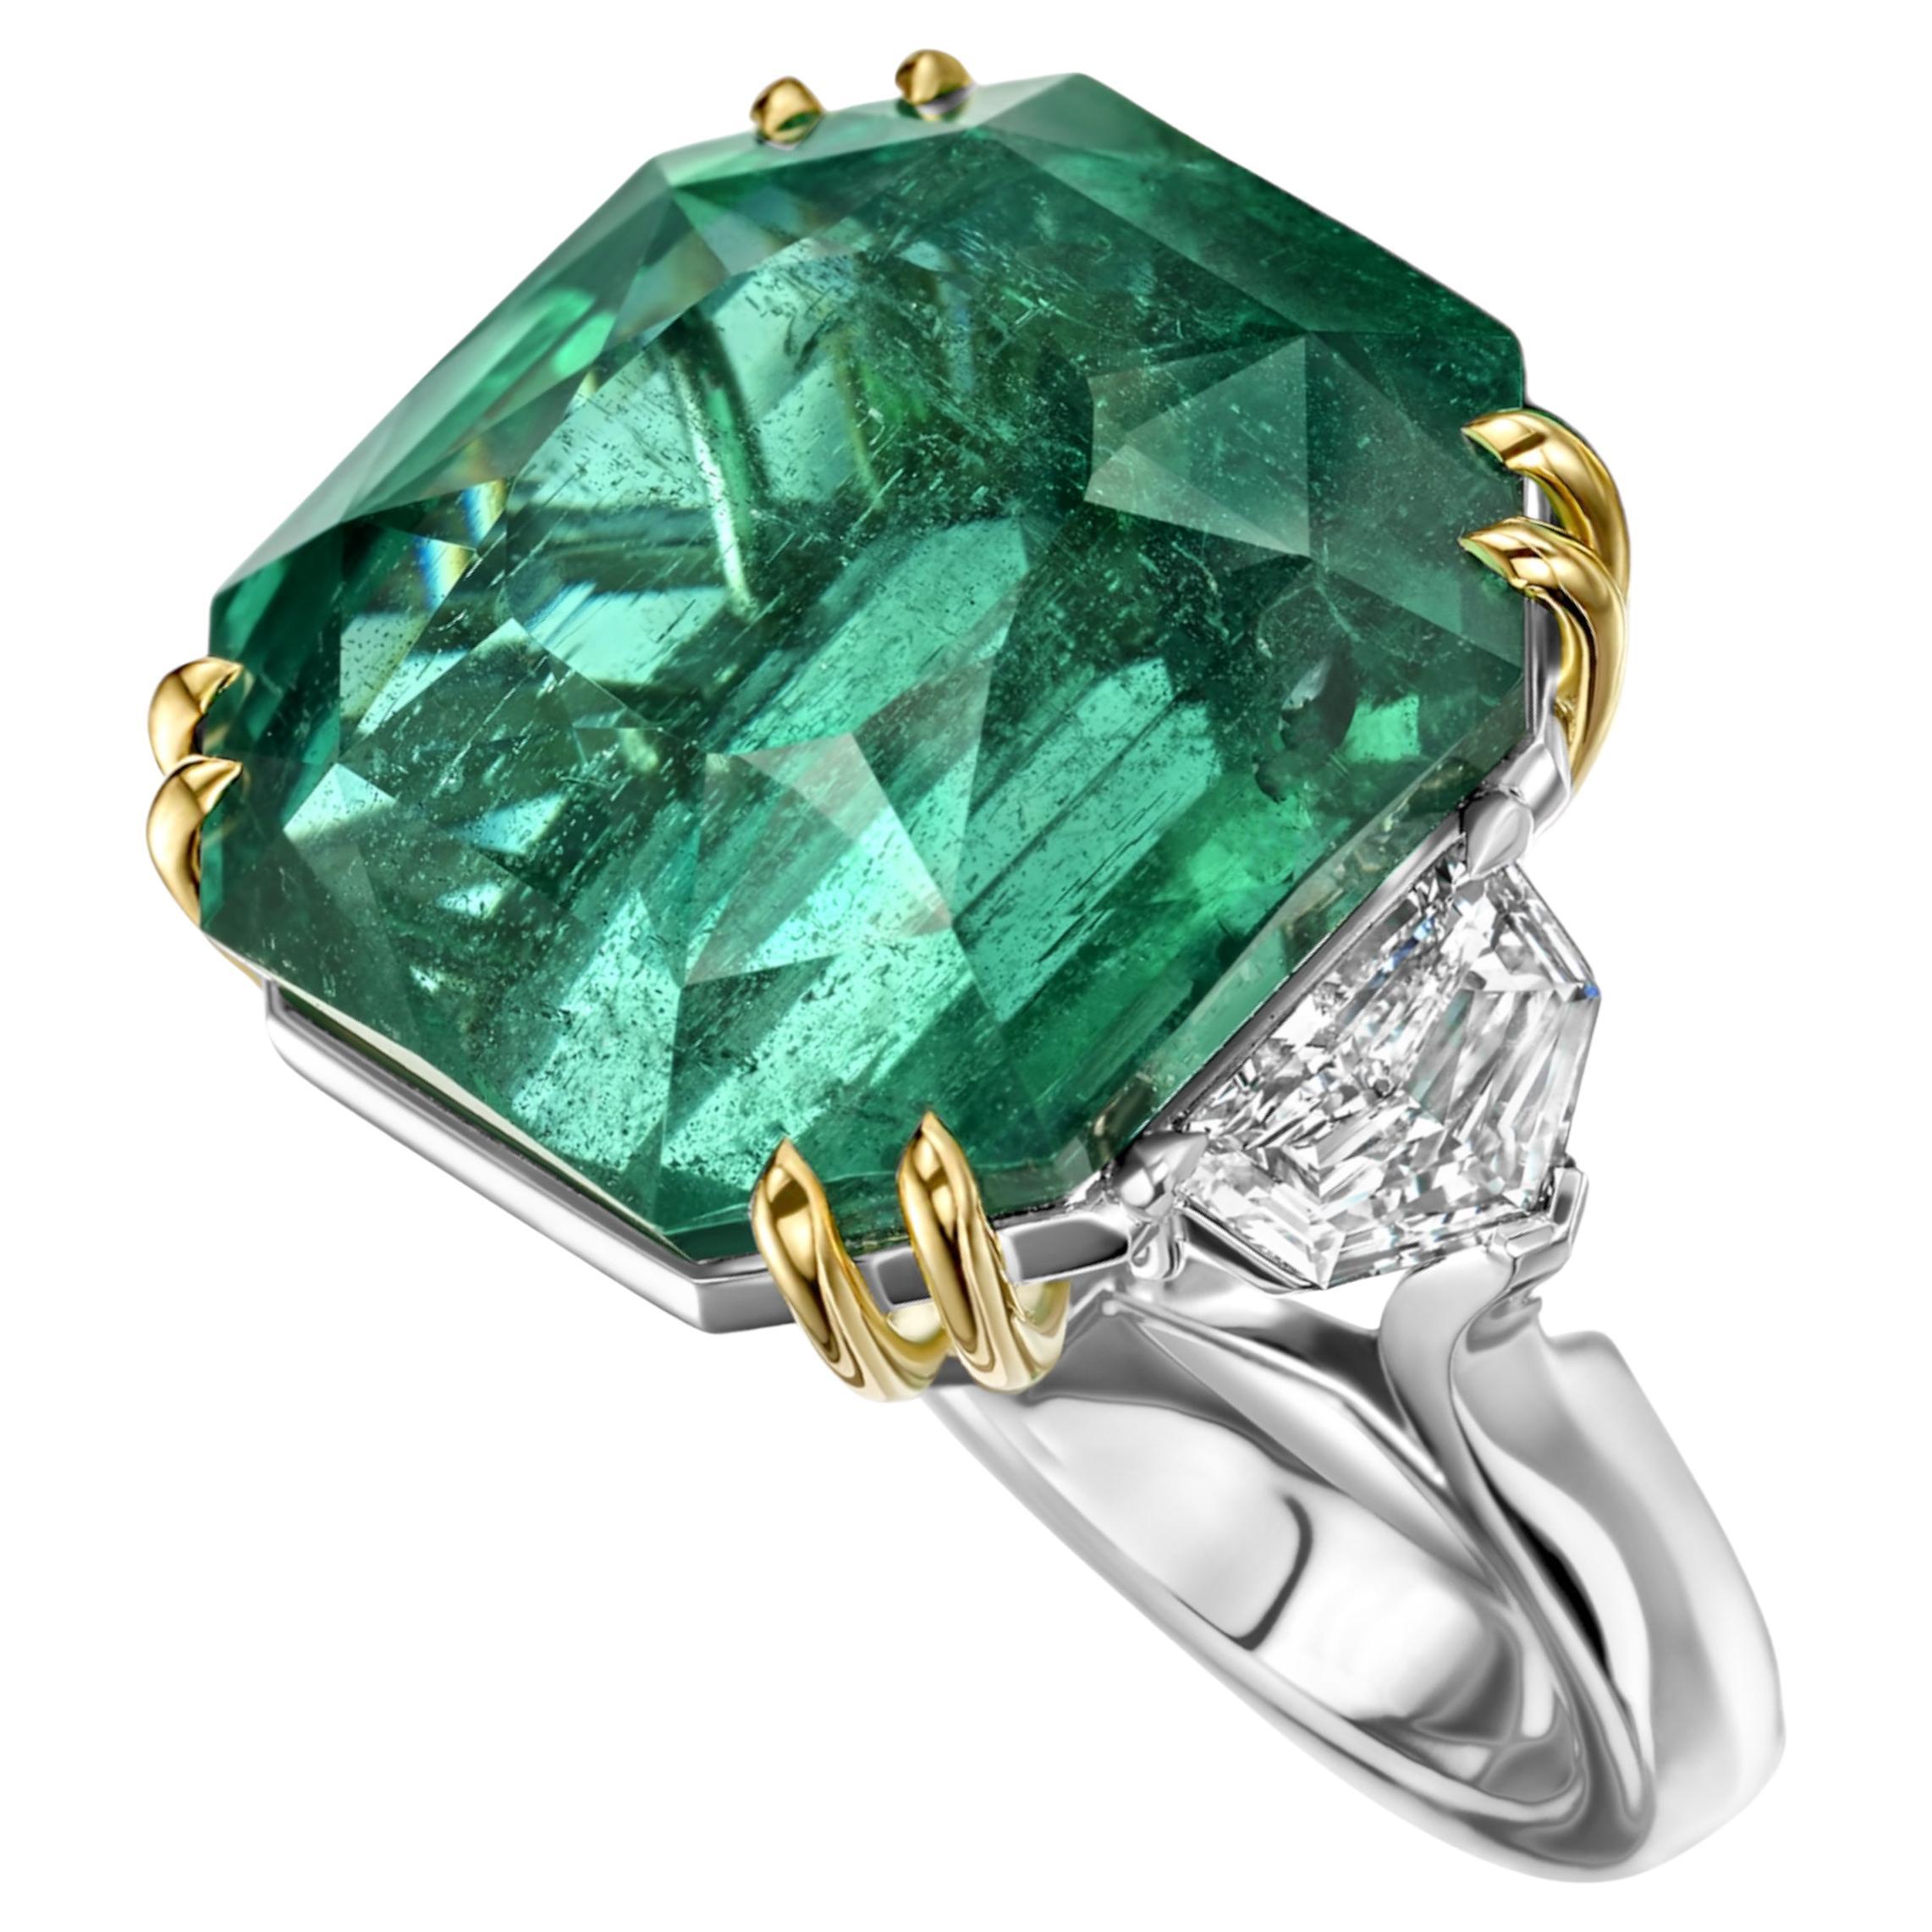 Platinum Ring with GRS Certified 37 Ct Natural No Oil Emerald & 1.21ct Diamonds